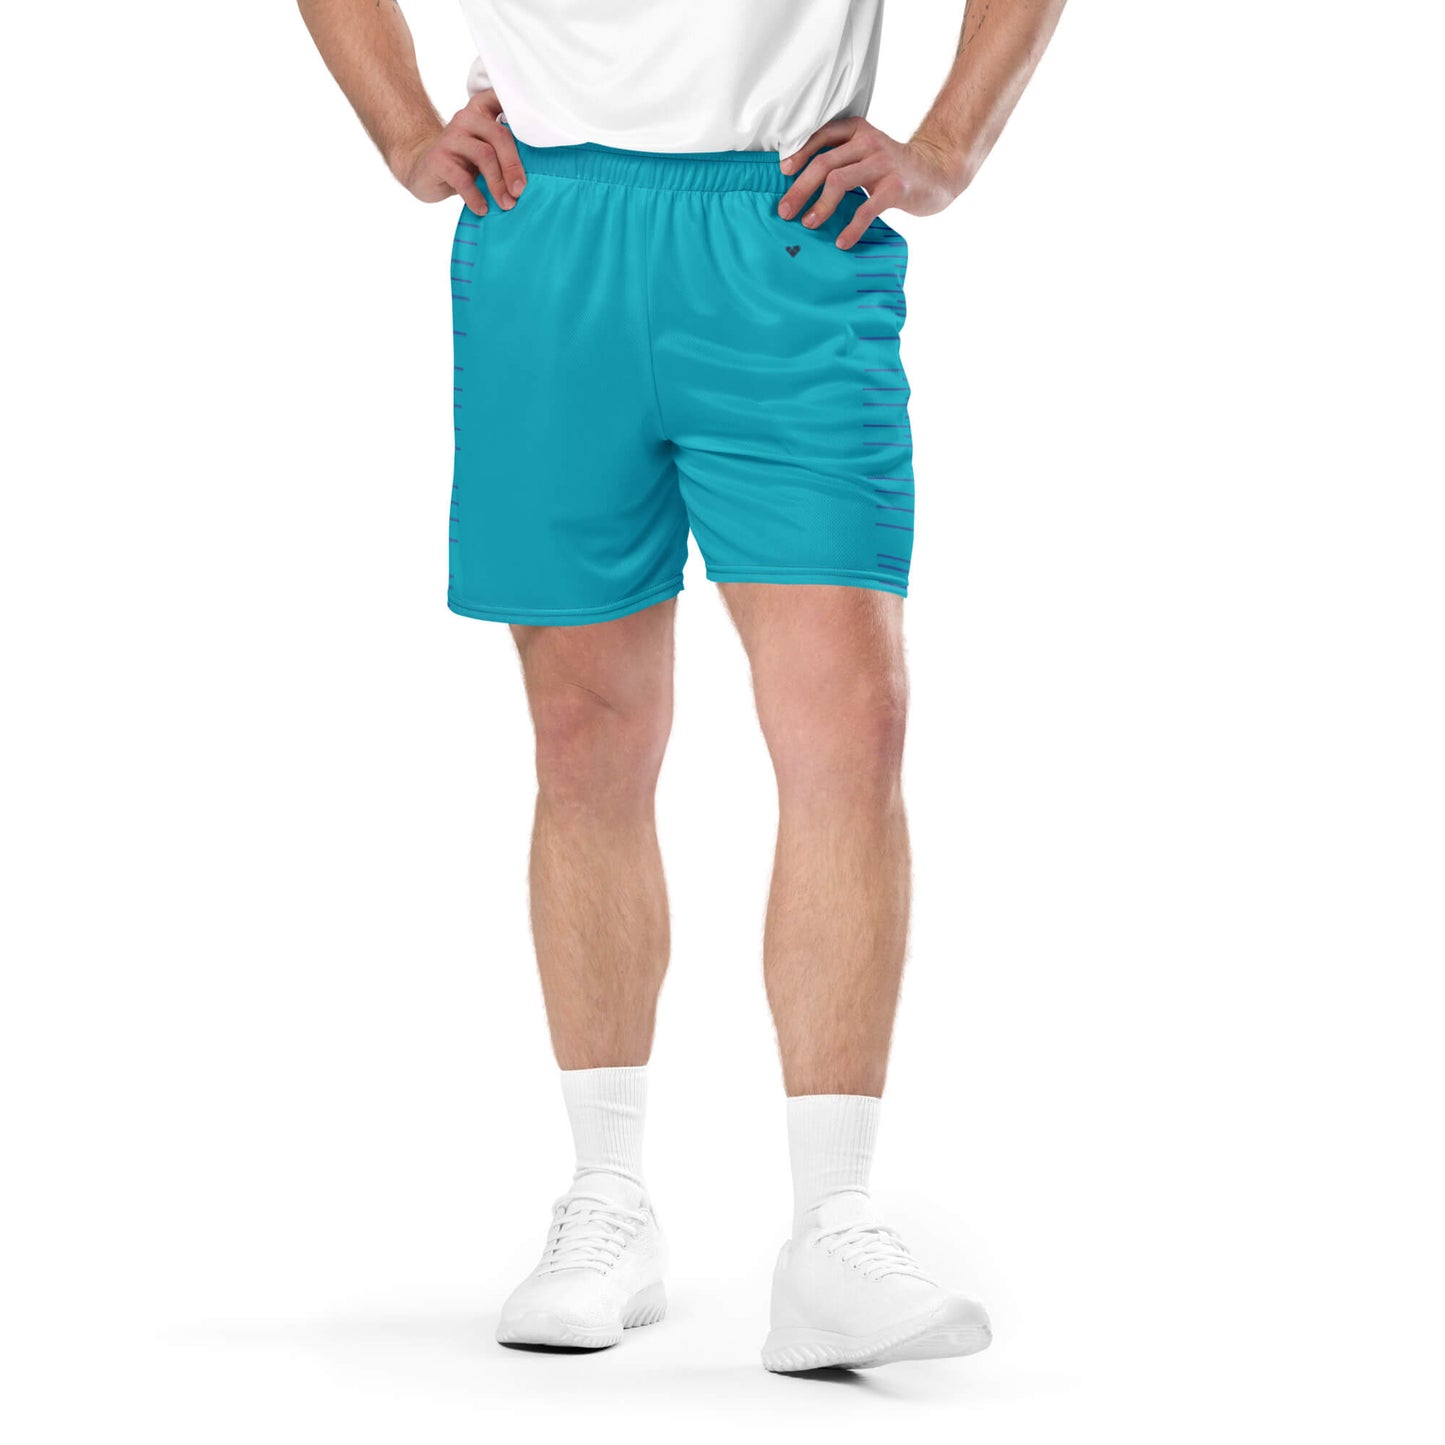 Confidence and charm in Turquoise Dual Mesh Shorts - CRiZ AMOR's love